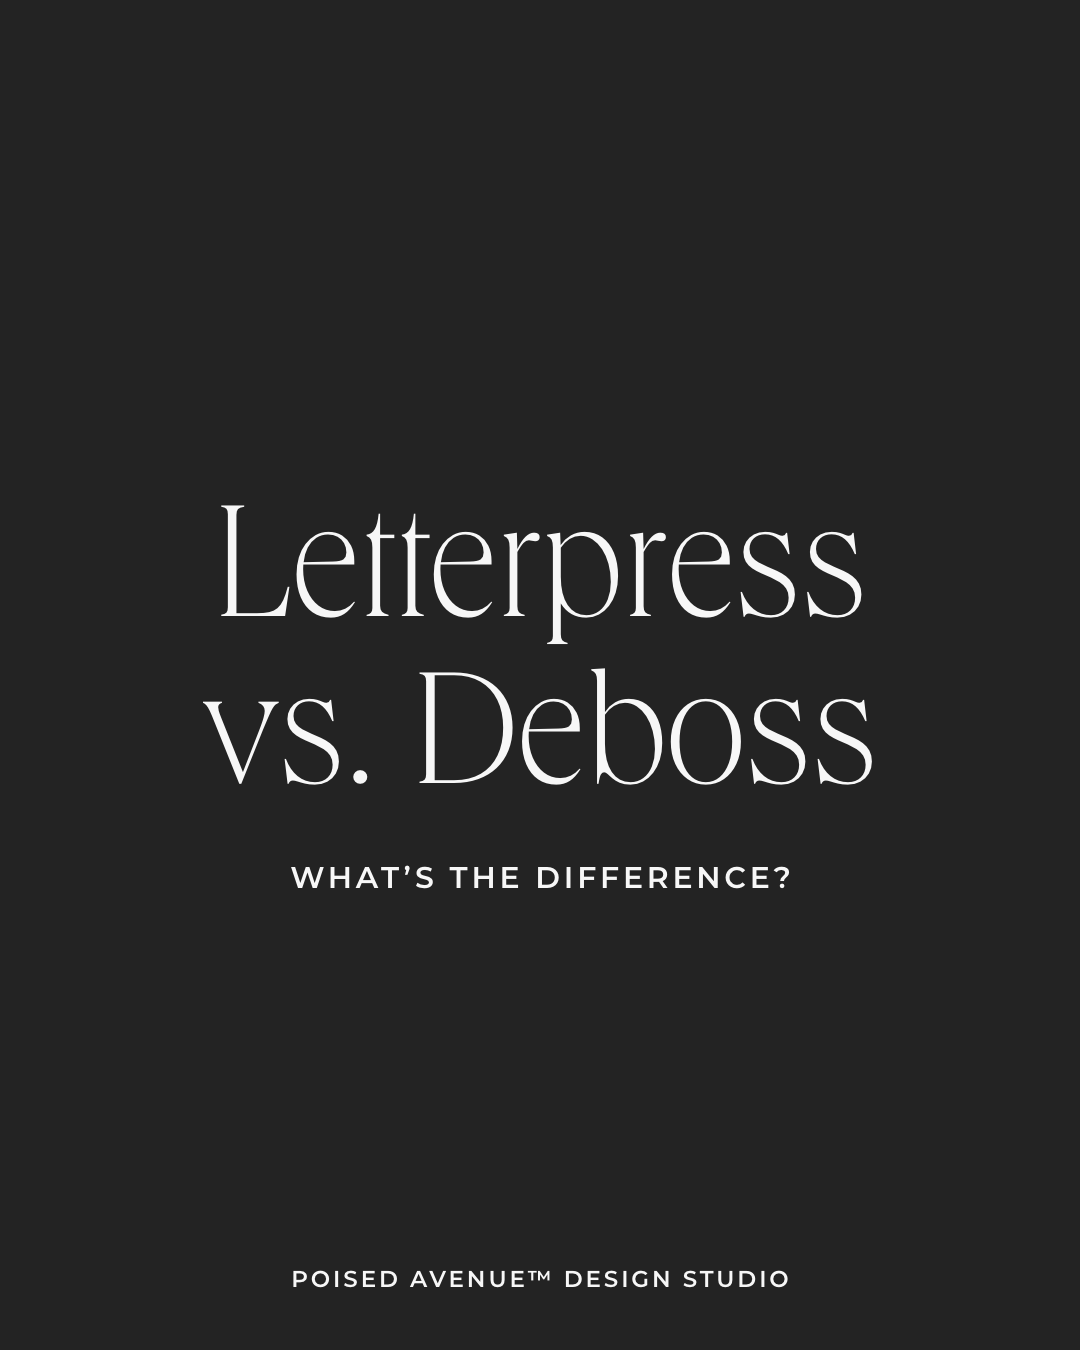 A blog post comparing letterpress printing to deboss printing by Amanda DeWoody, a professional brand designer out of Southern California.